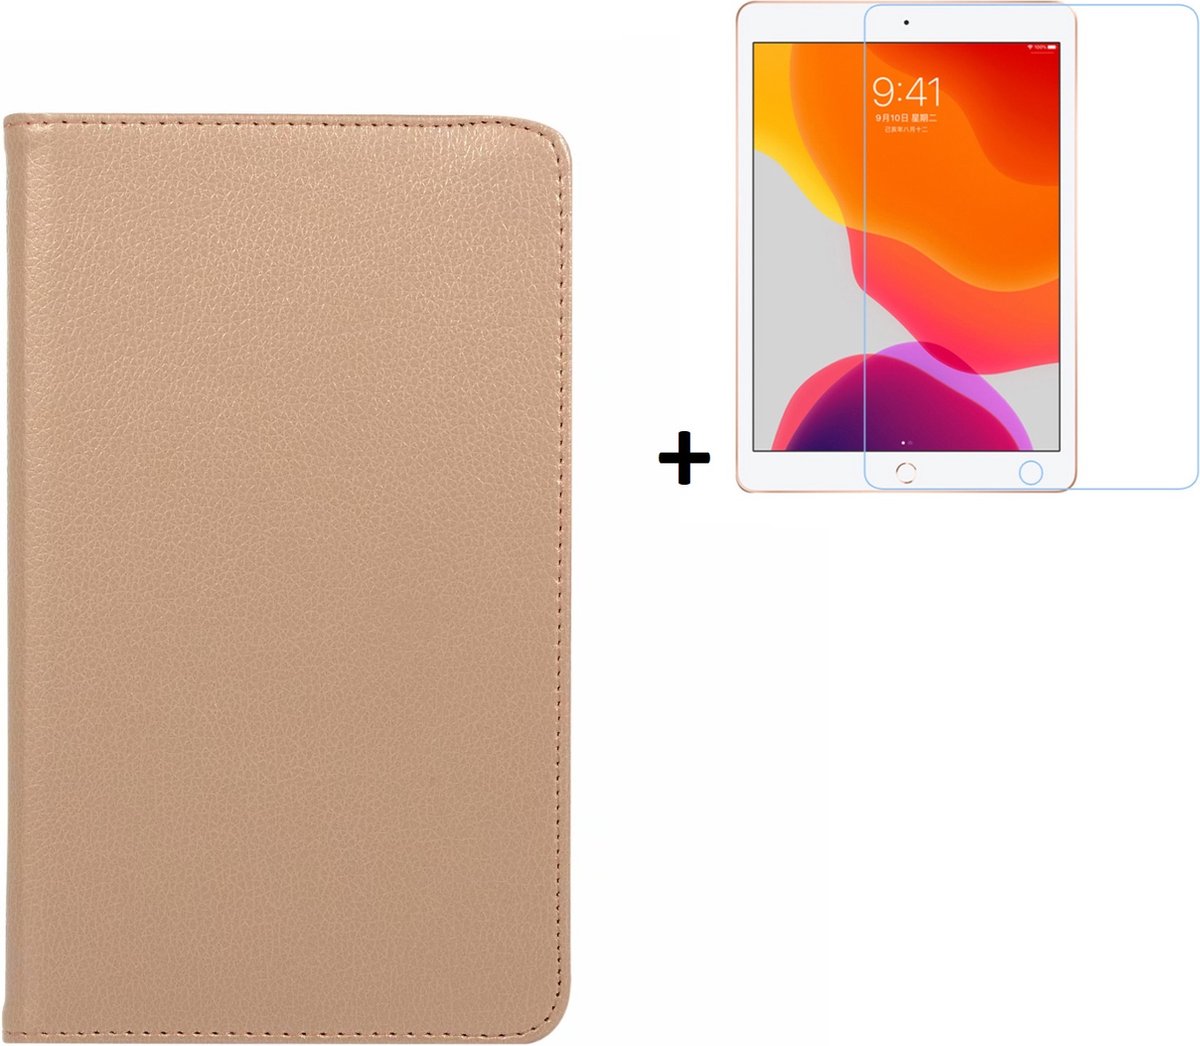 Hoesje iPad 7 10.2 2019 - 10.2 inch - Hoesje iPad 8 10.2 2020 - Hoesje iPad 9 10.2 2021 - iPad 10.2 Bookcase Hoes - Screen Protector iPad 10.2 - Goud Hoesje + Tempered Glass